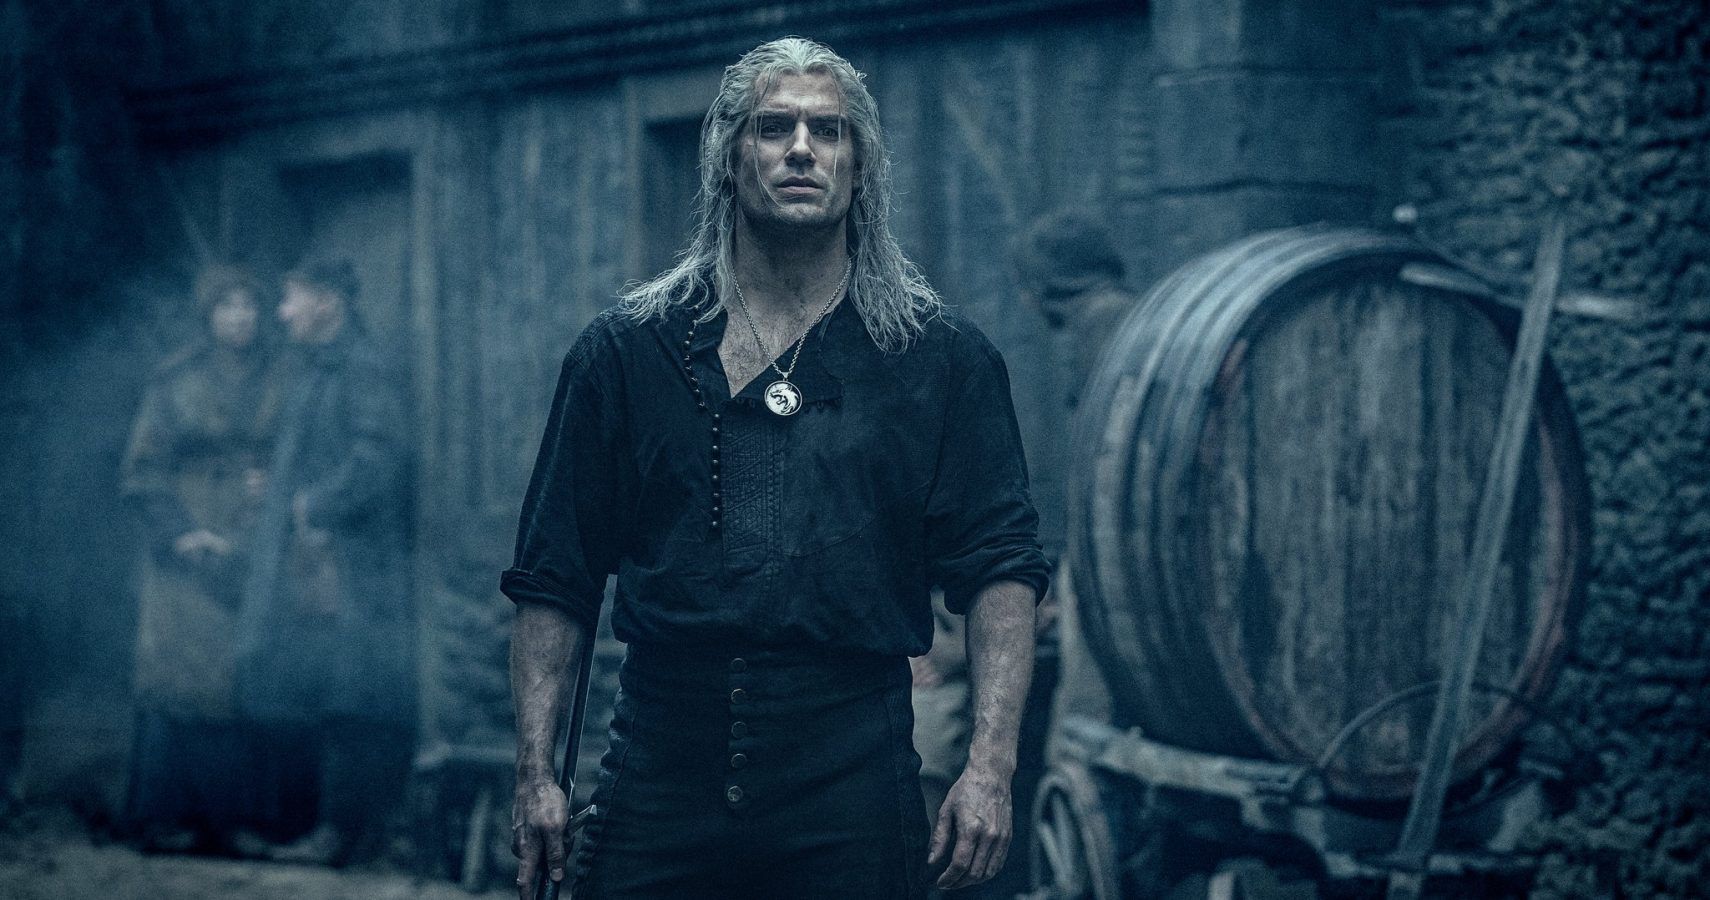 5 Similarities Between The Witcher & Game Of Thrones (& 5 Differences)